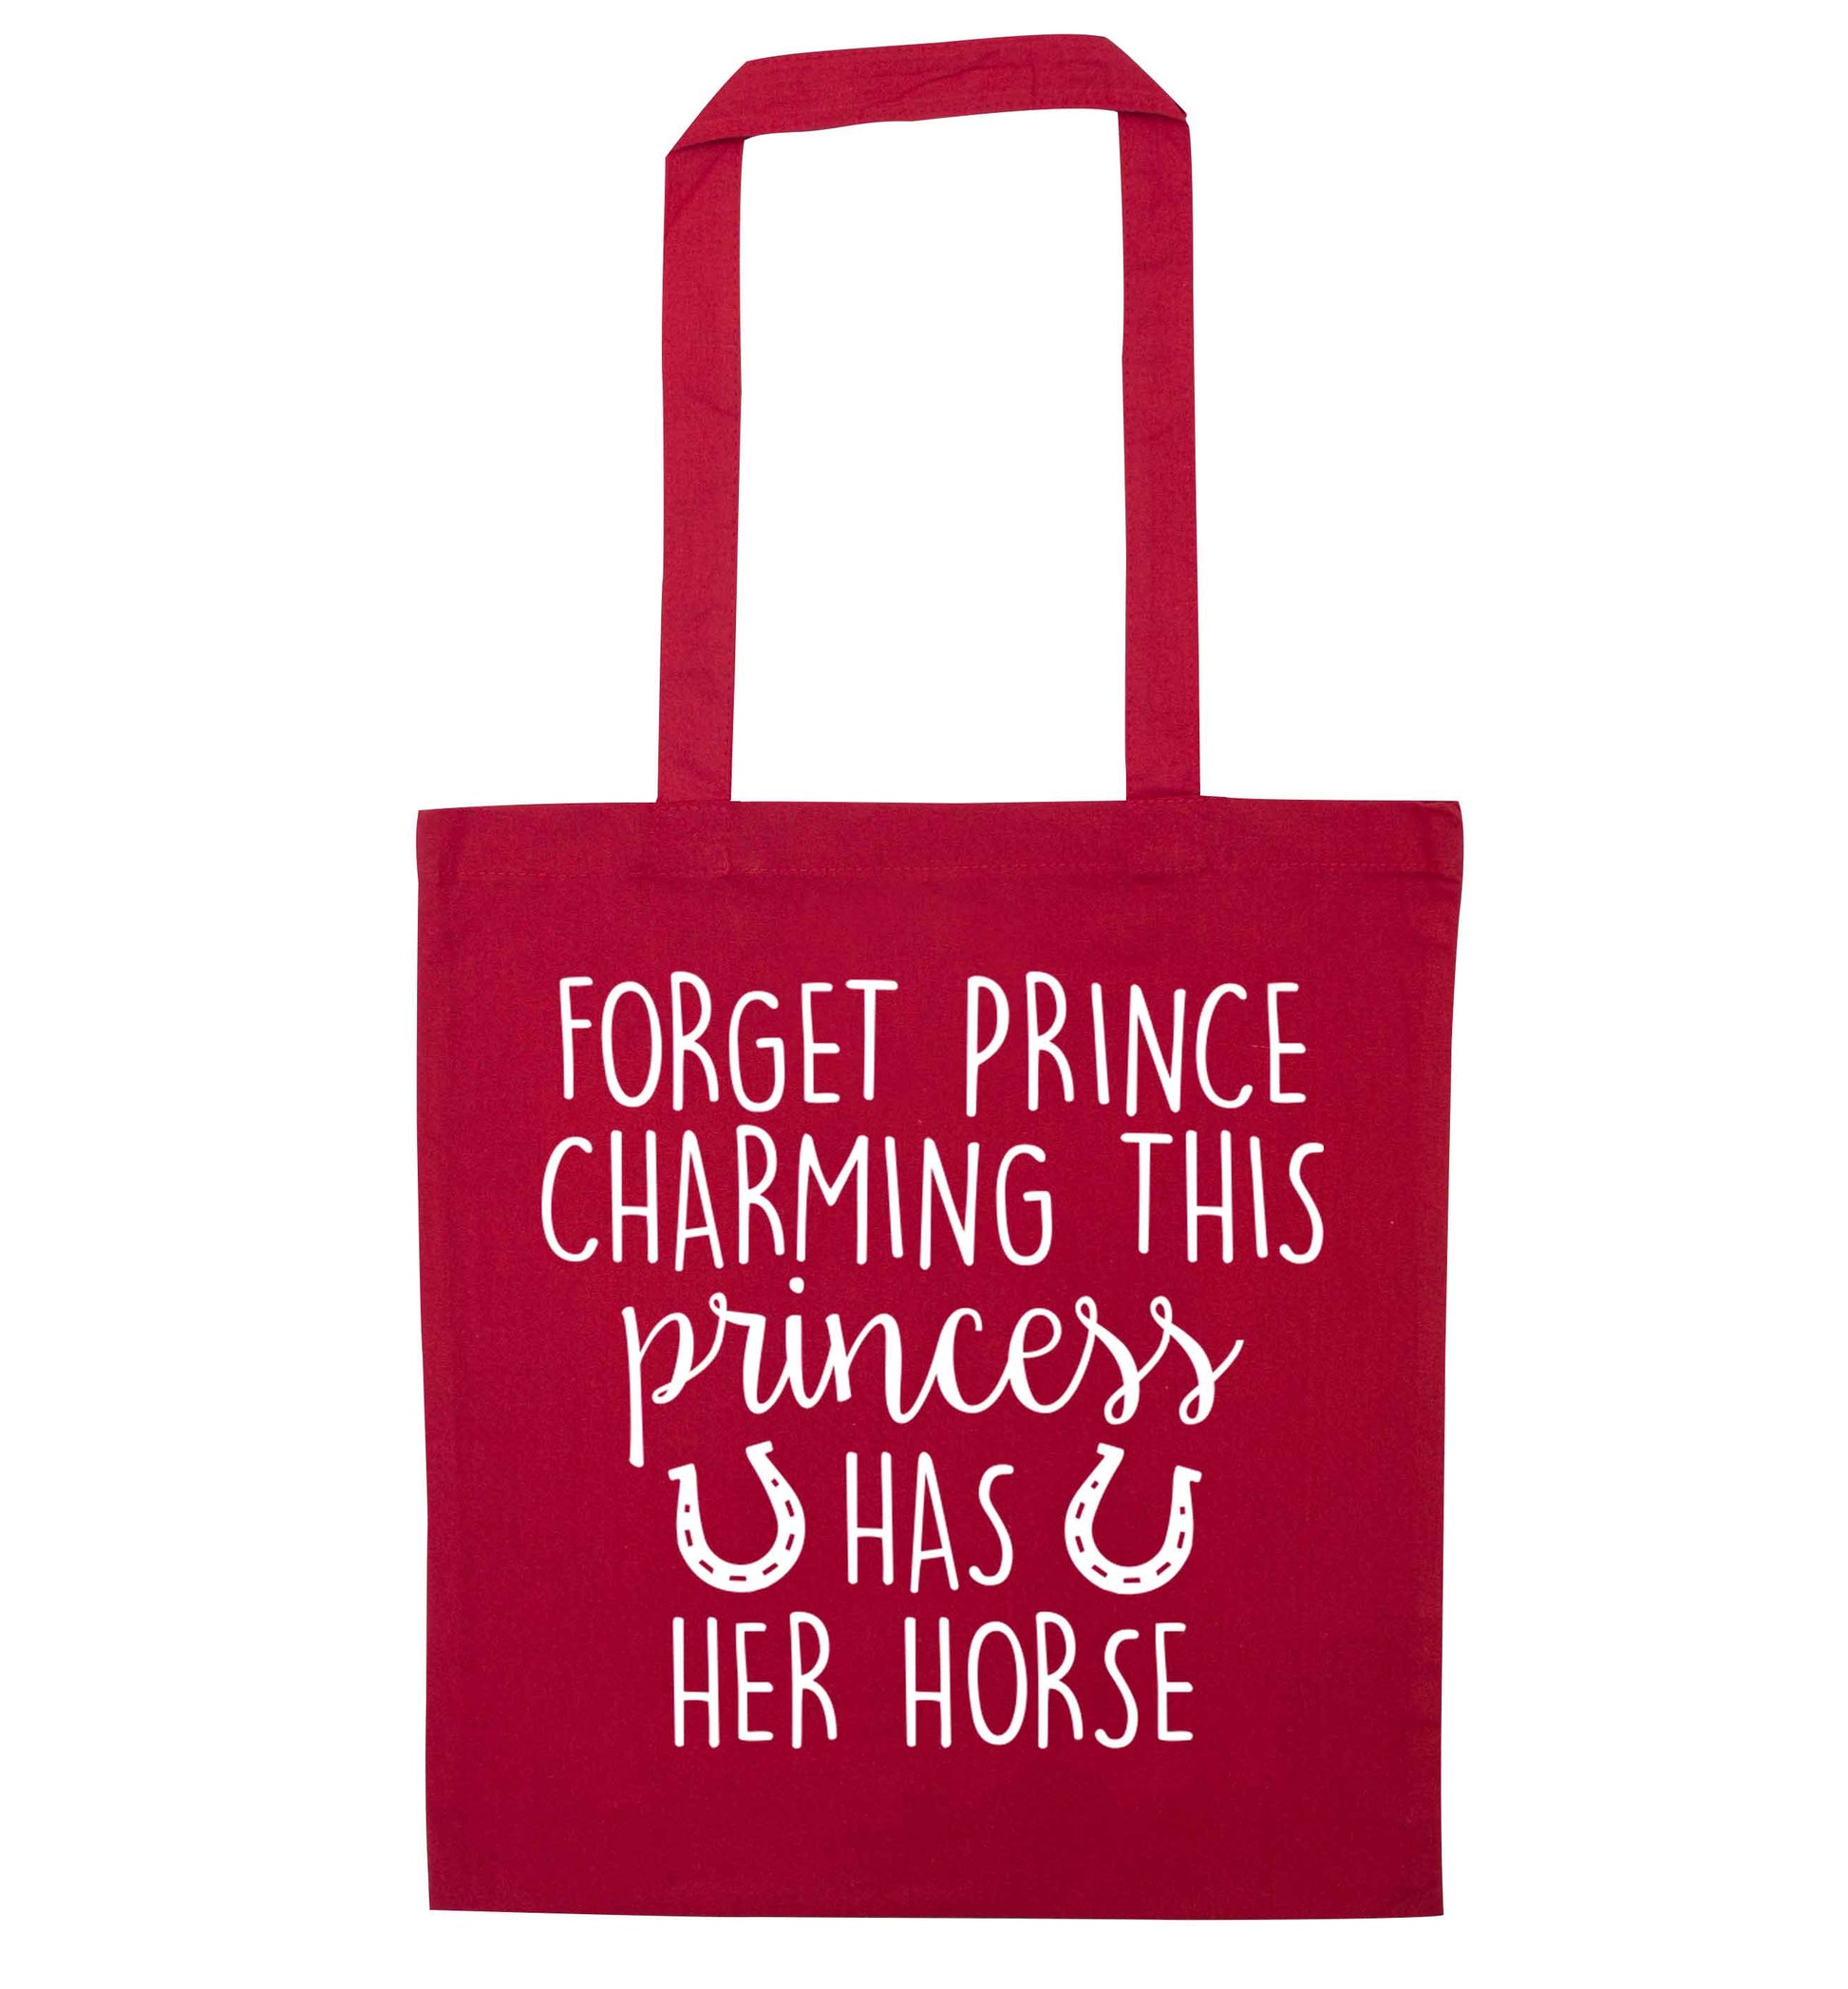 Forget prince charming this princess has her horse red tote bag